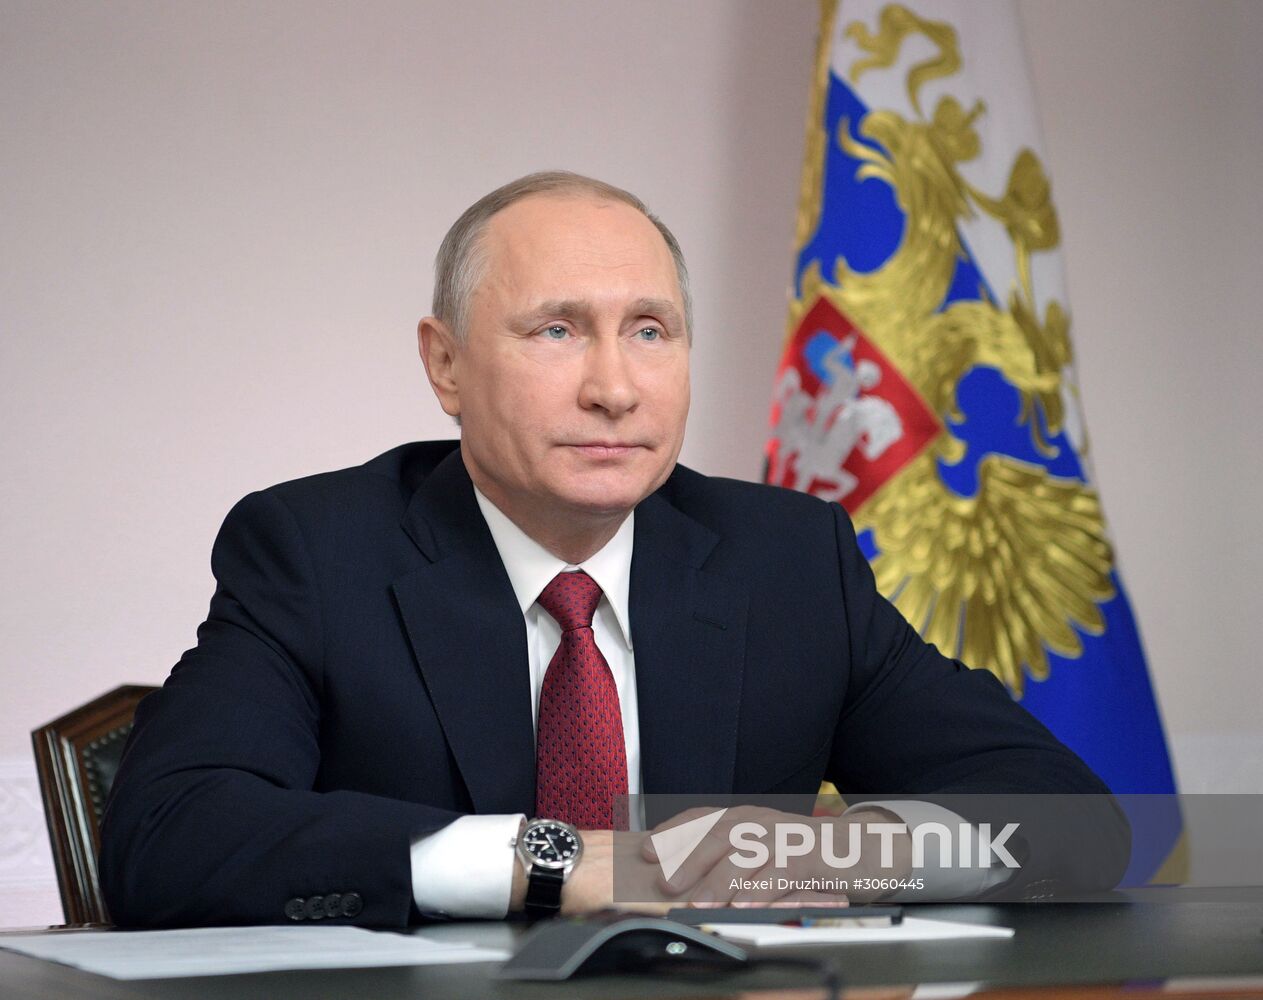 Russian President Vladimir Putin holds video conference on the first voyage of Arctic gas tanker to Sabetta port